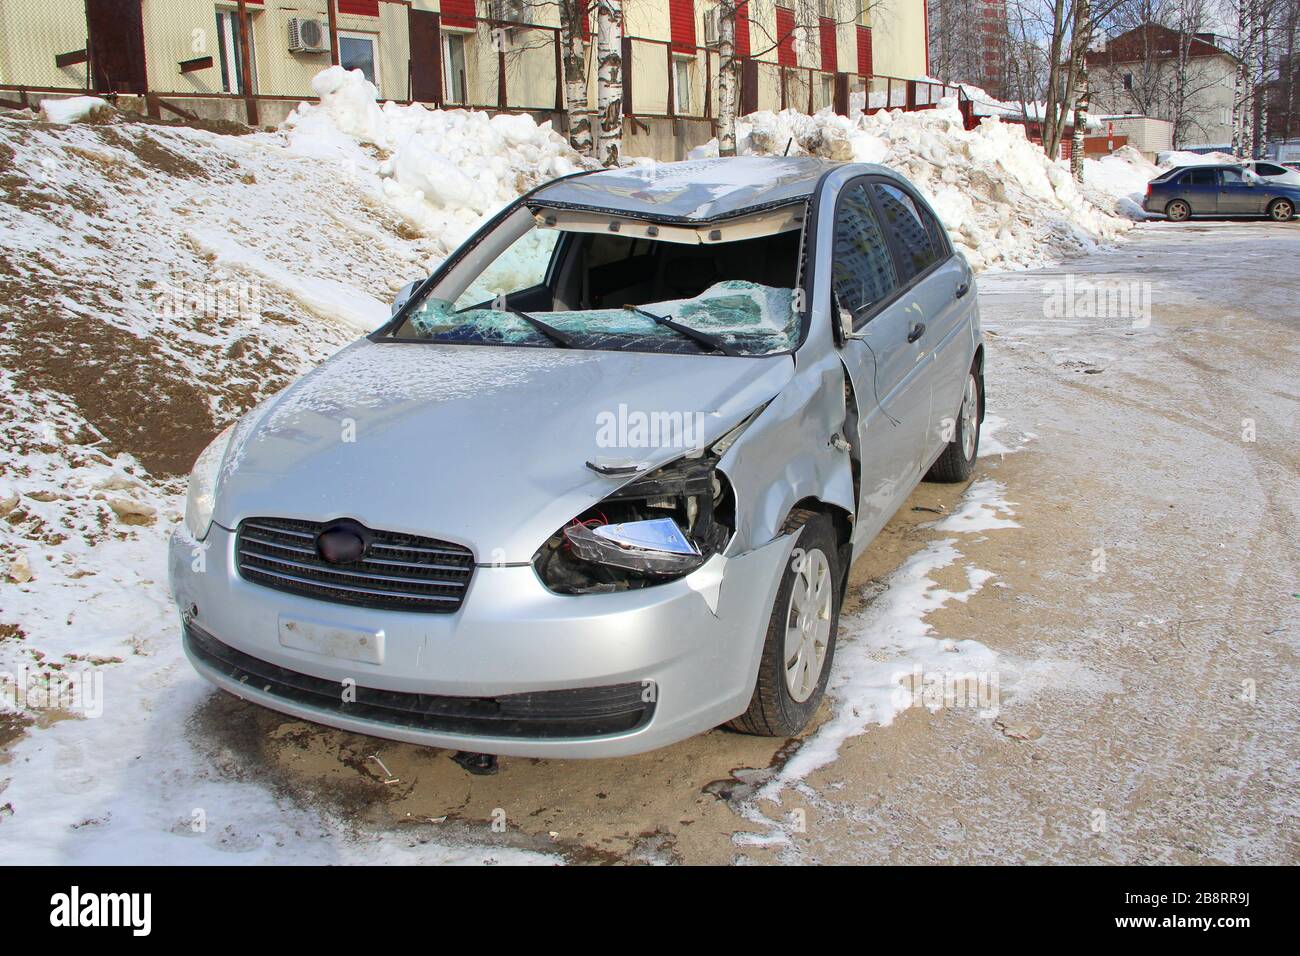 A broken silver car after an accident on the road. Transport security concept. Stock Photo